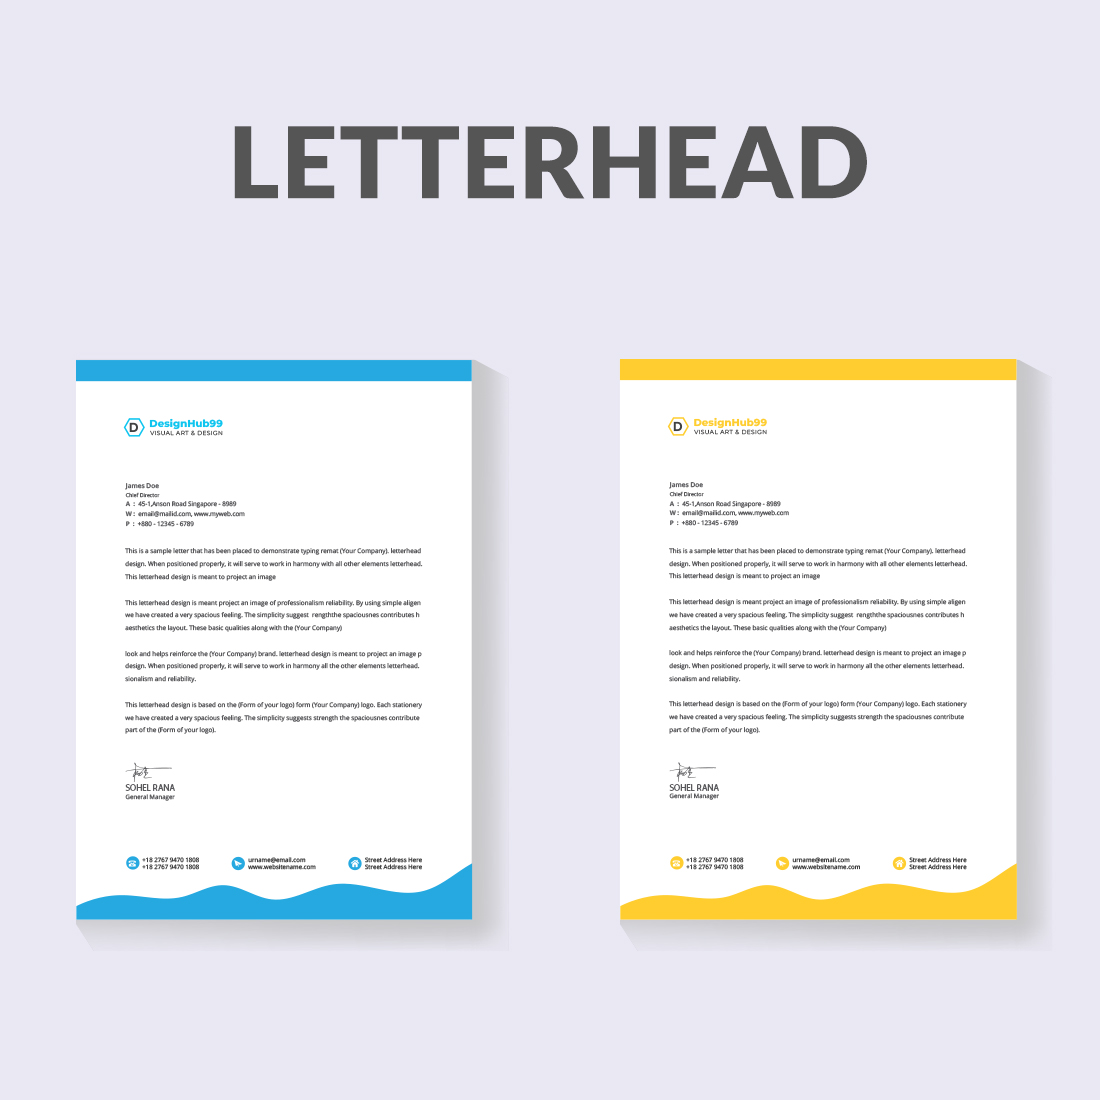 Letterhead design template for your project, letterhead, business letterhead design cover image.